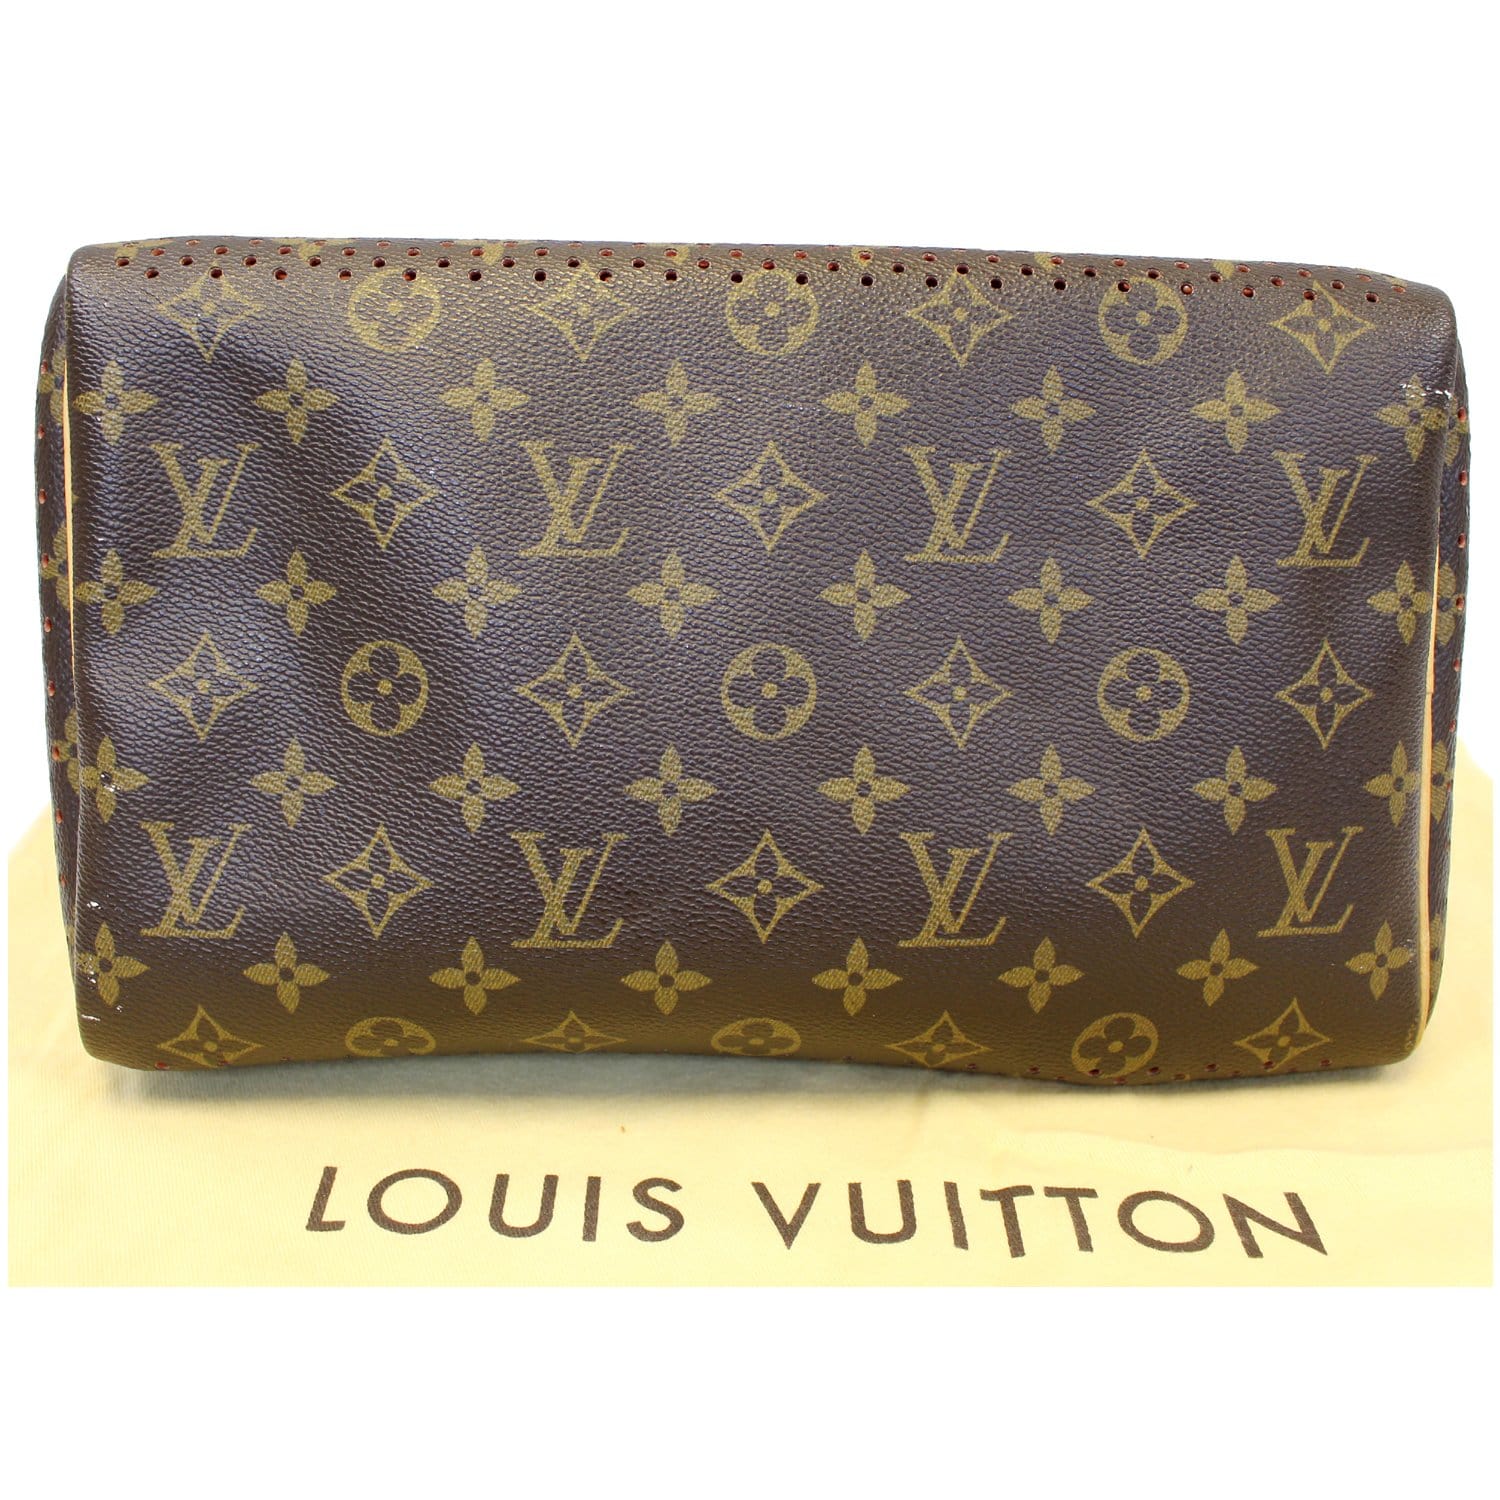 Authentic rare Louis Vuitton Perforated Speedy 30 in excellent condition